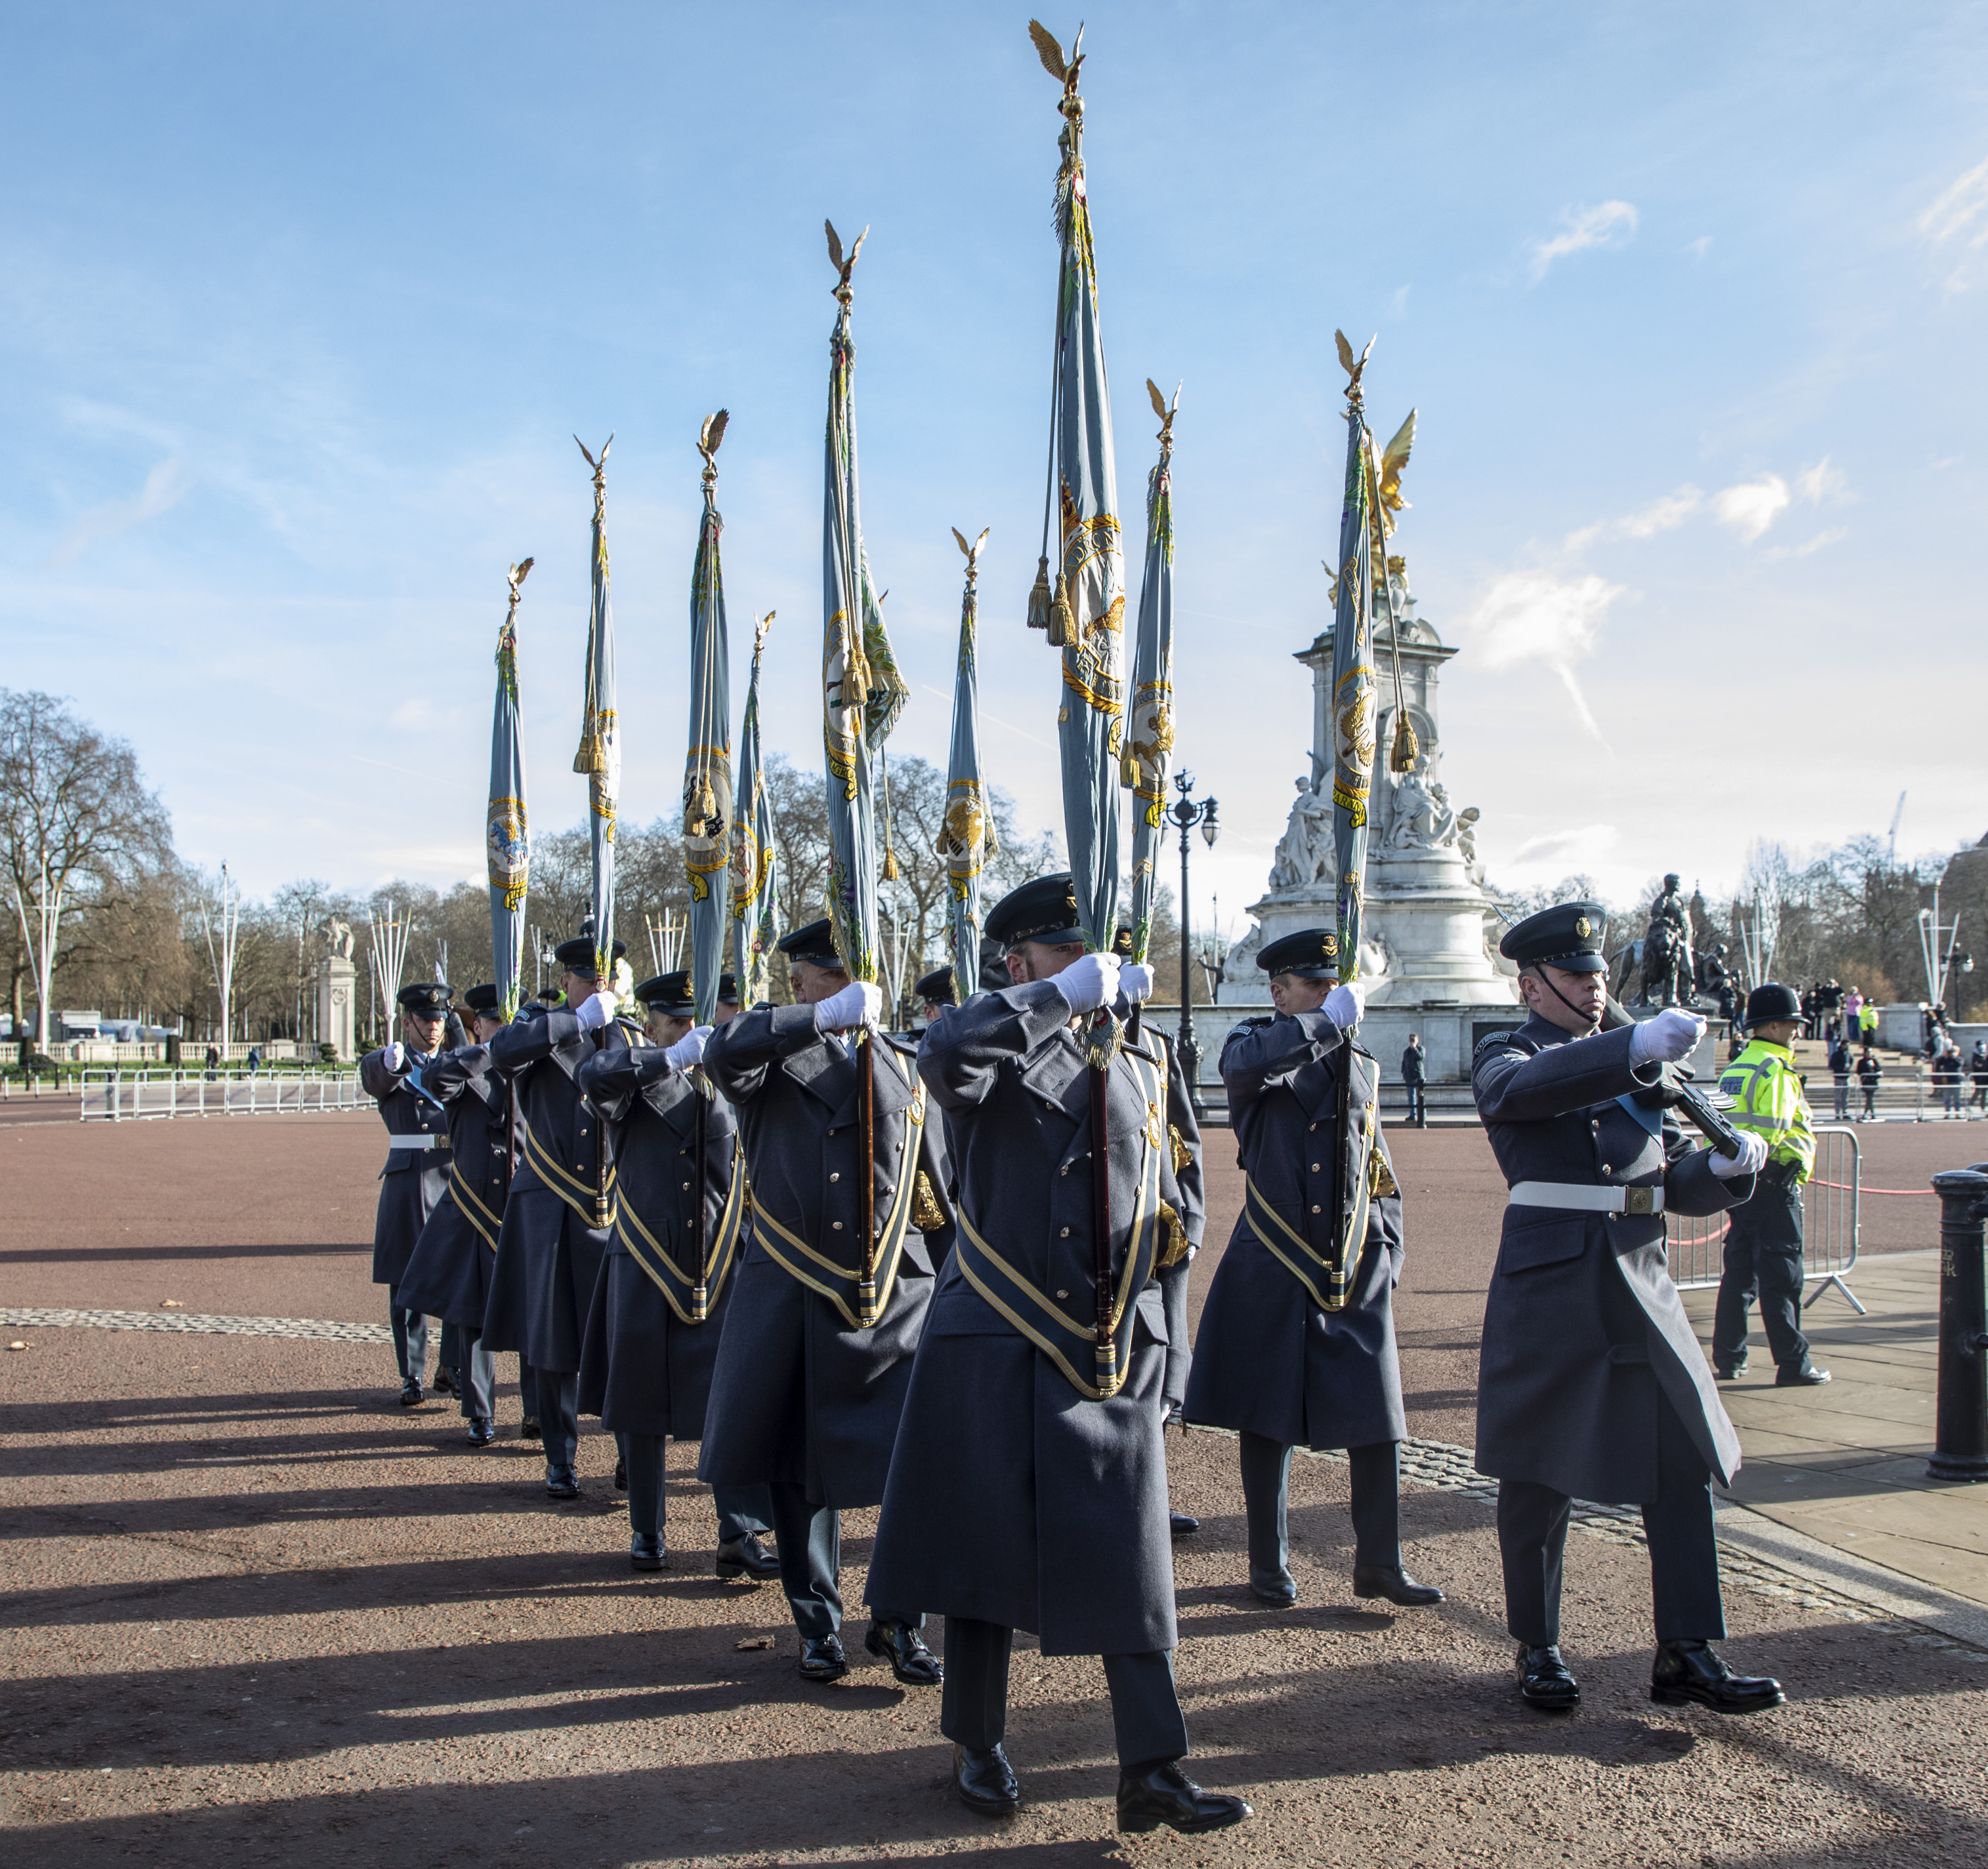 Queen's Colour Squadron with flag colours on parade outside Buckingham Palace.